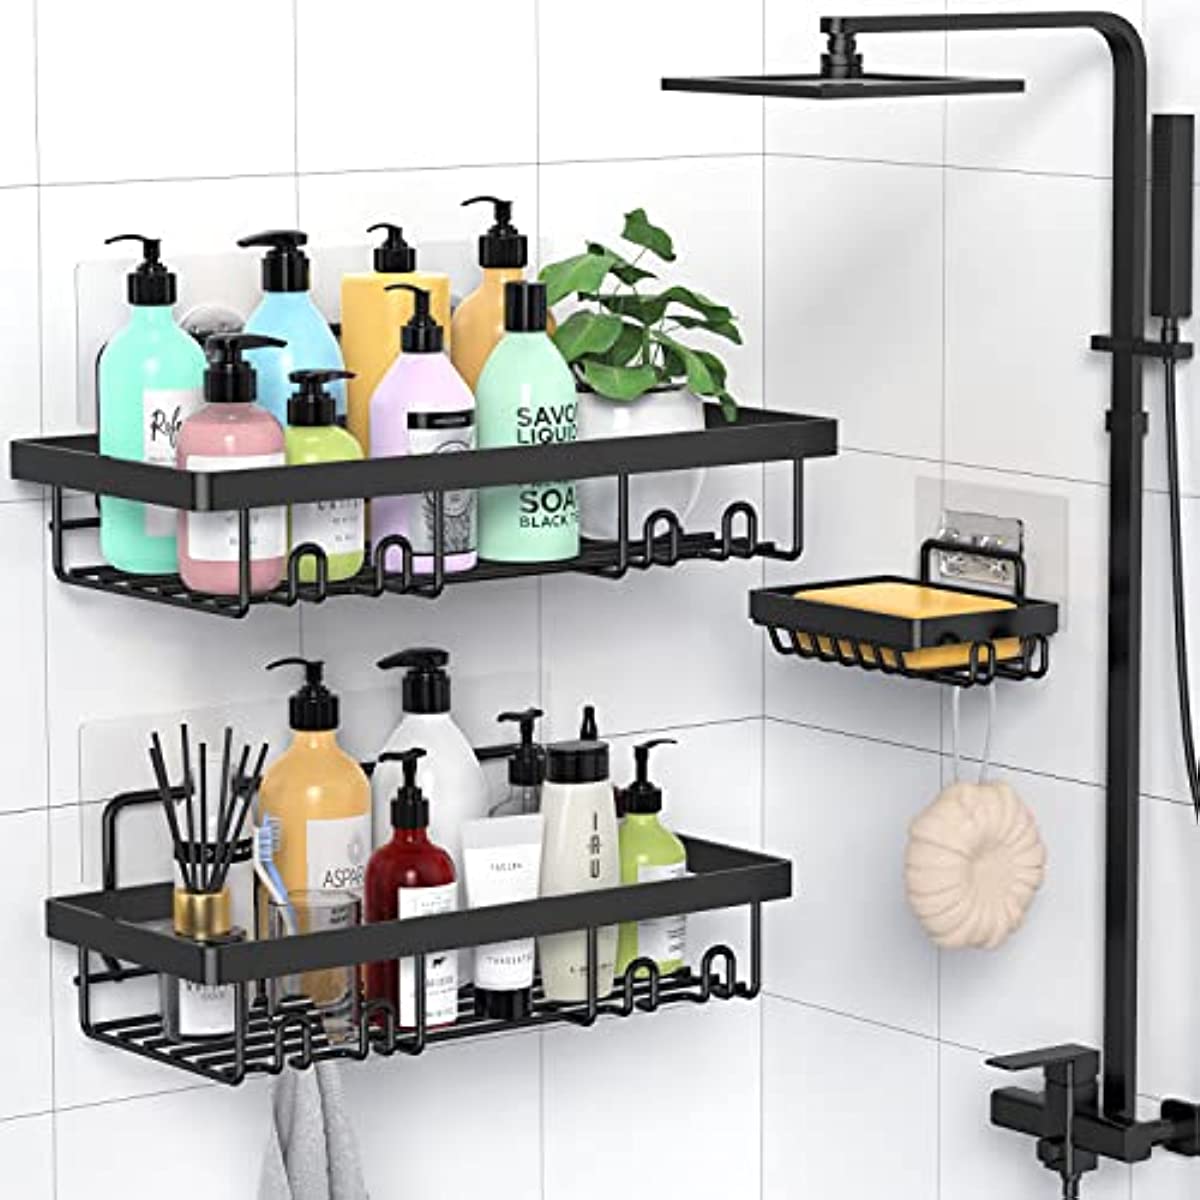 Punch-free Suction Cup Bathroom Shelf, Wall-mounted Aluminum